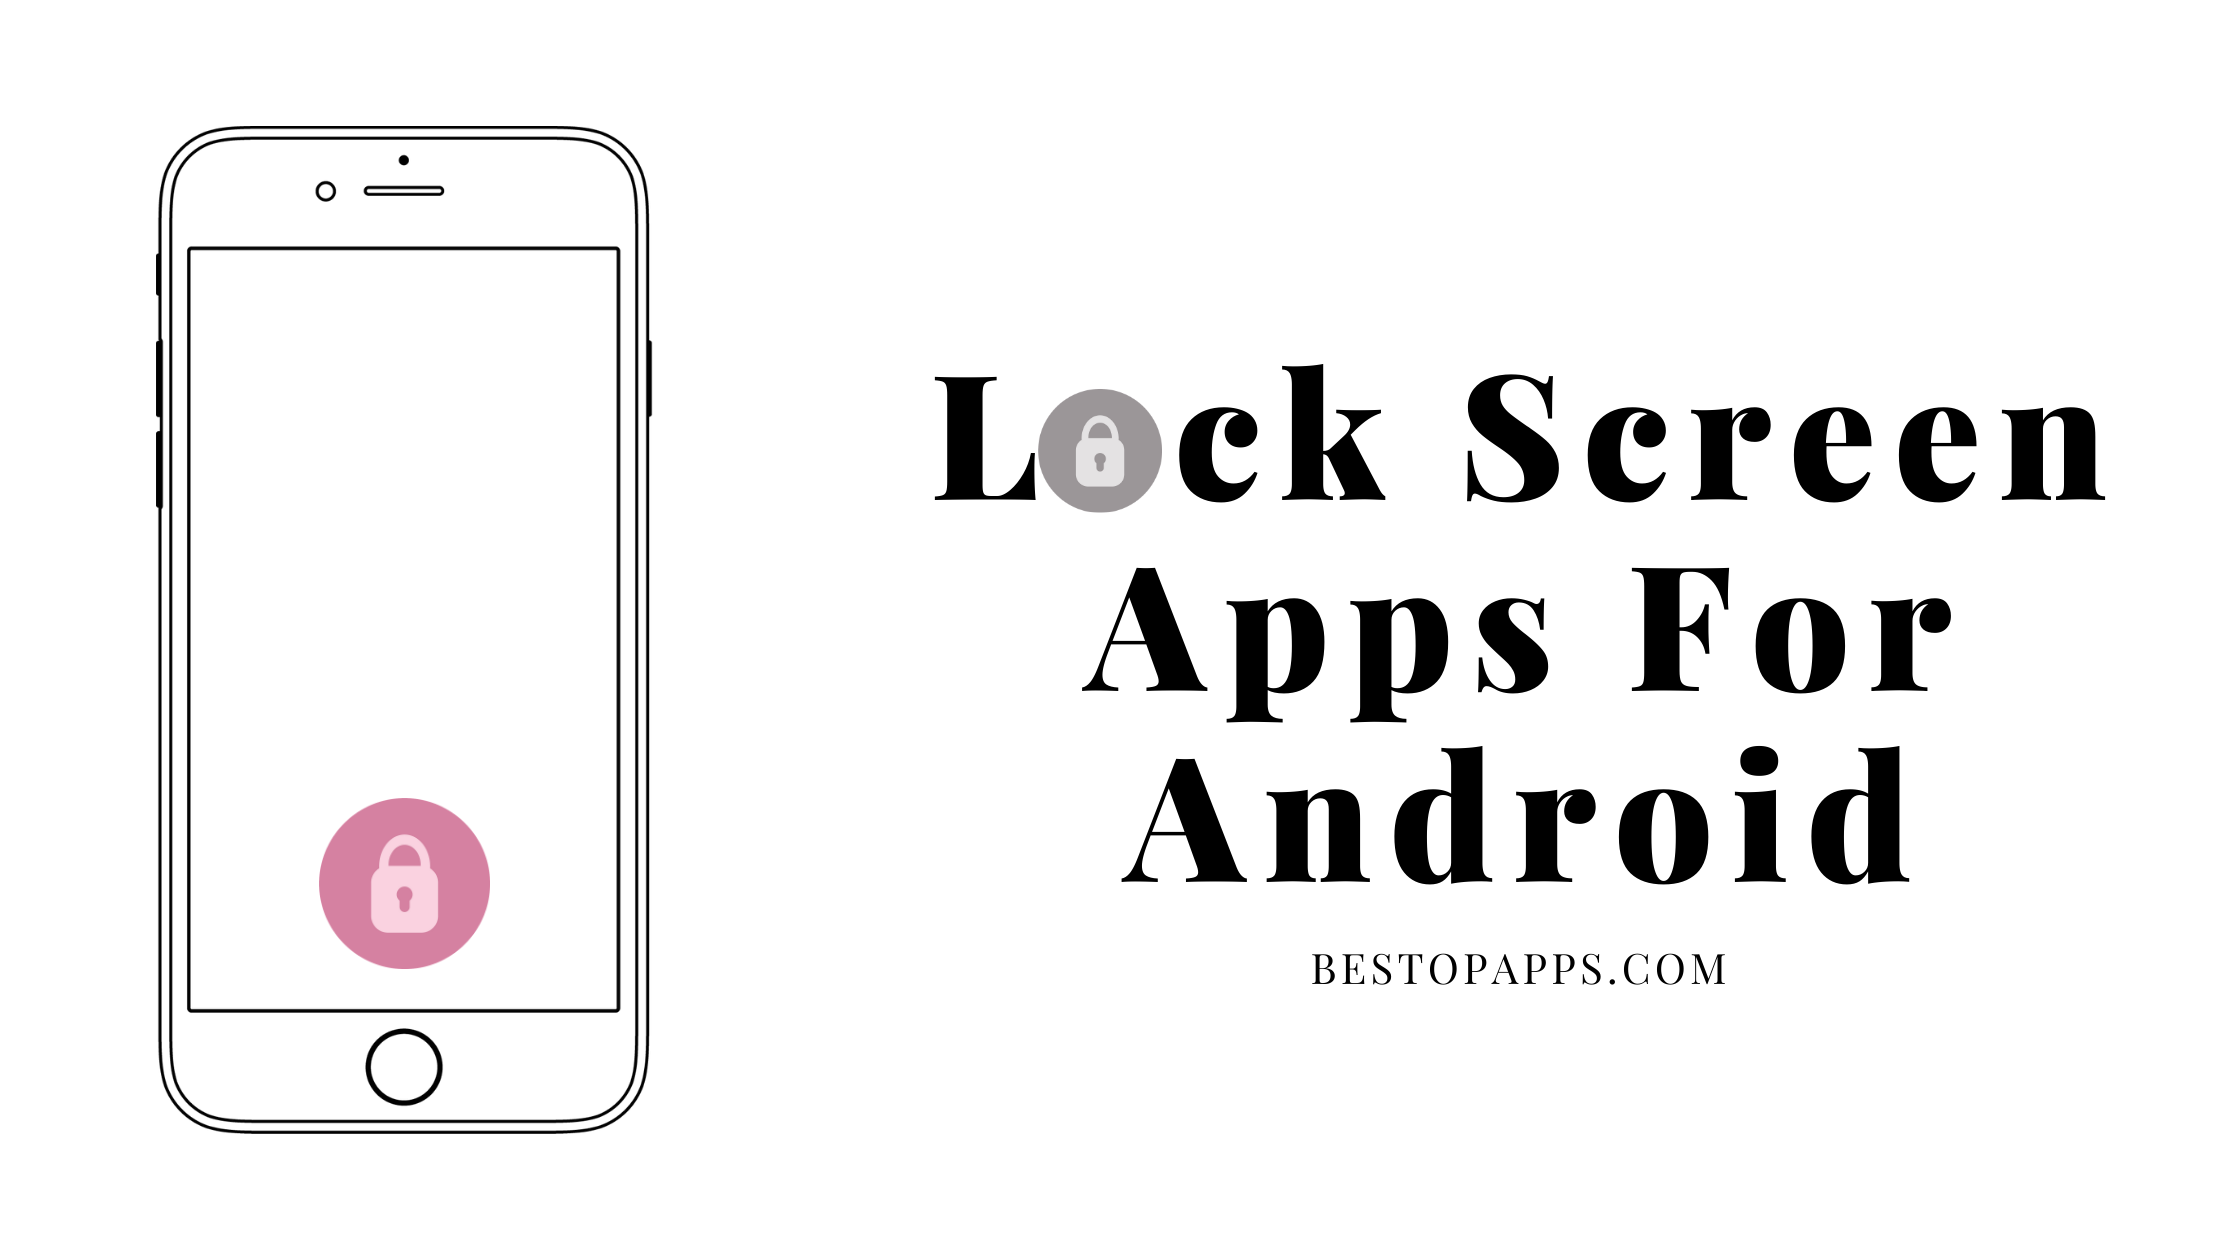  Security App | Security Apps For Android | Security App Lock | Screen Lock App | Hiden App - Sinroid.com